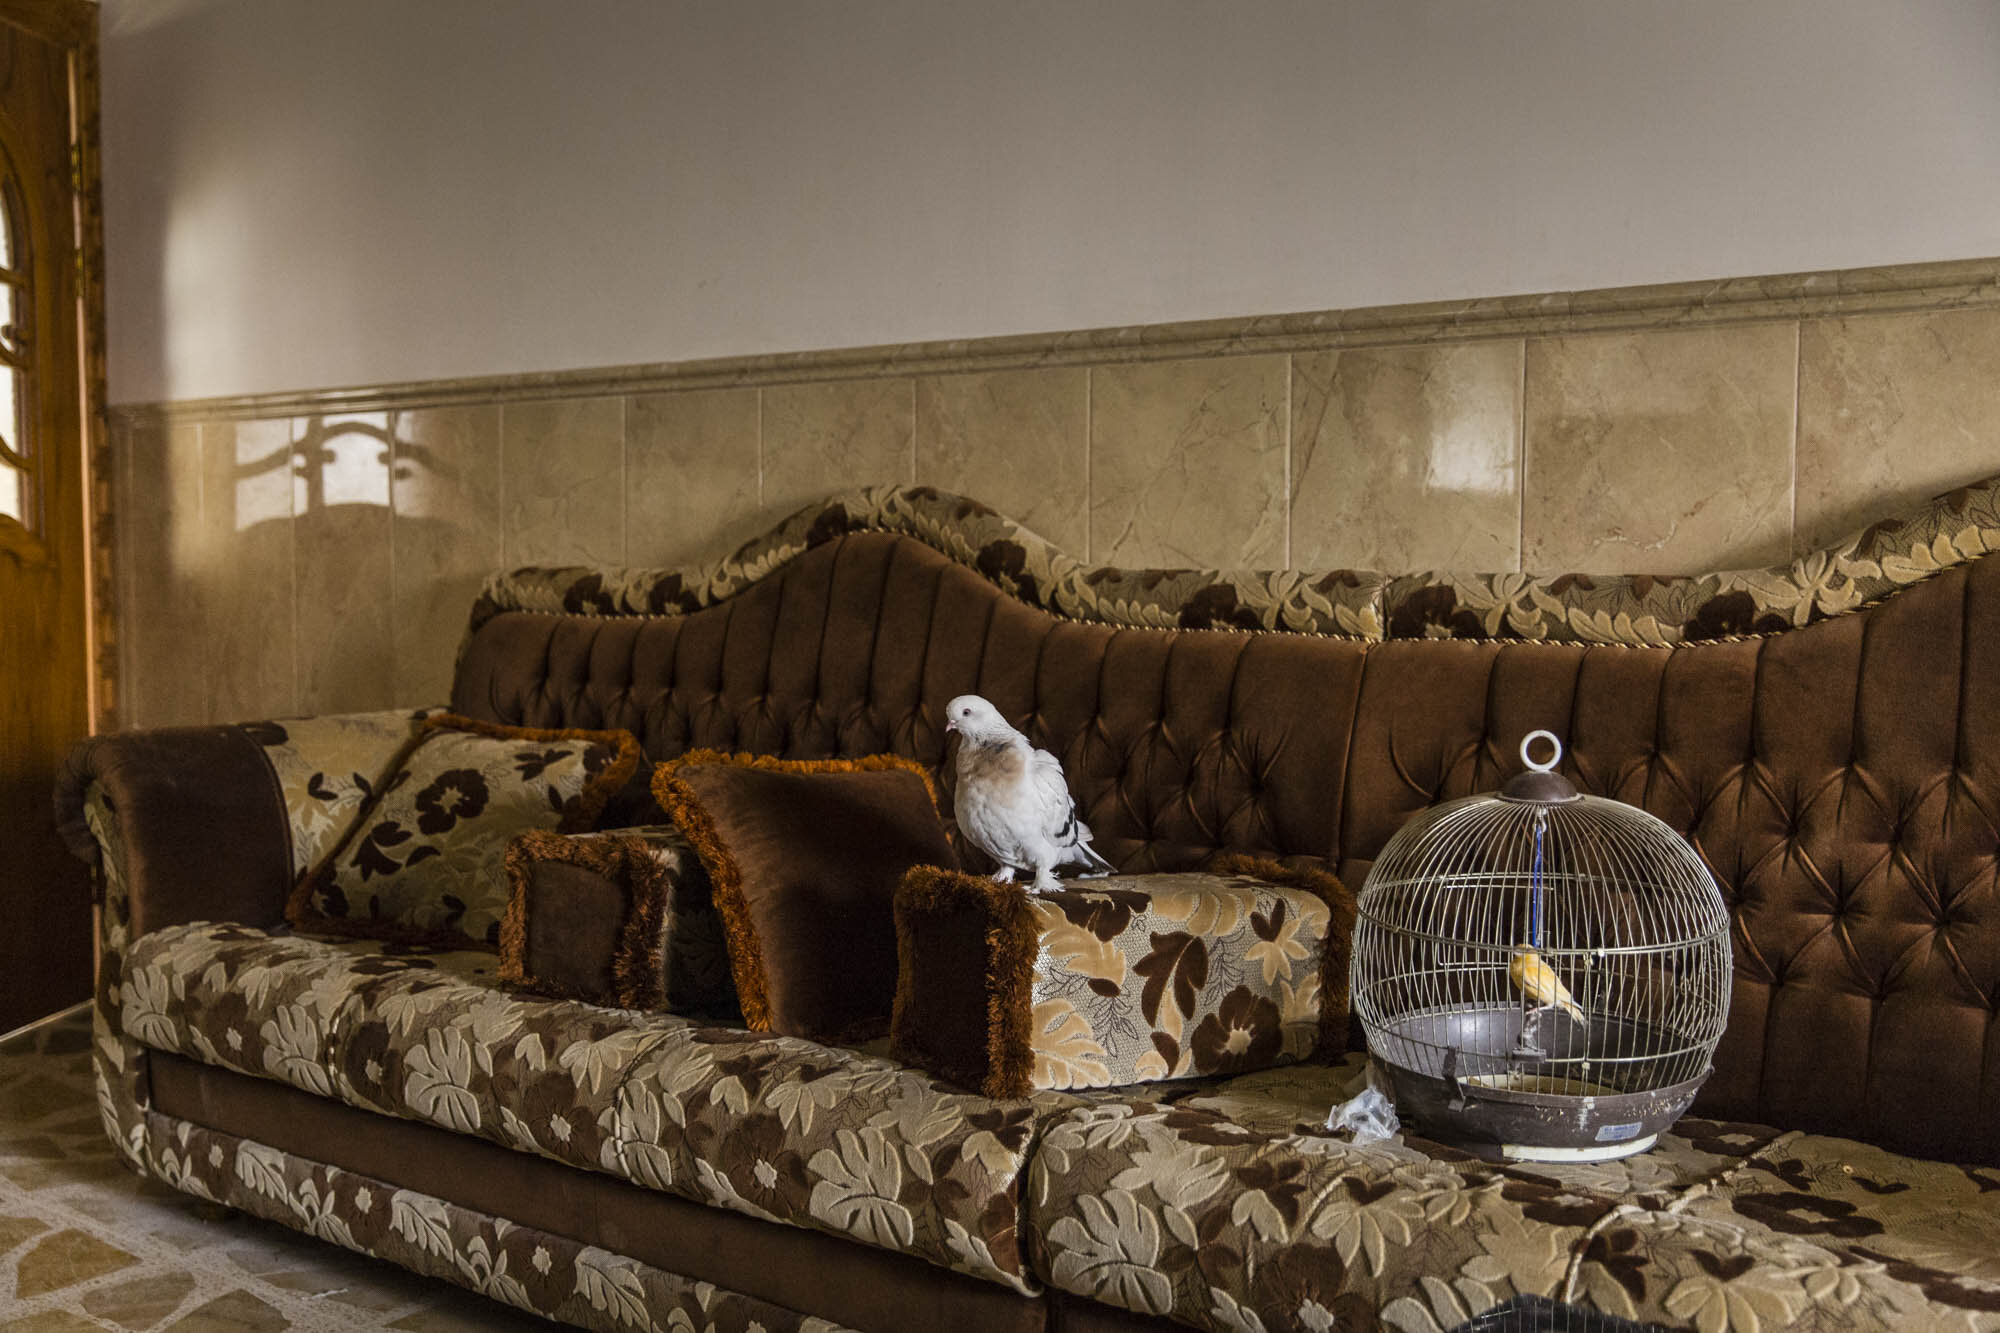  A homing pigeon and a canary bird rescued by Iraqi special forces soldiers sat on the couch of a deserted house in the Rifai neighbourhood of west Mosul. Iraq - May 2017 